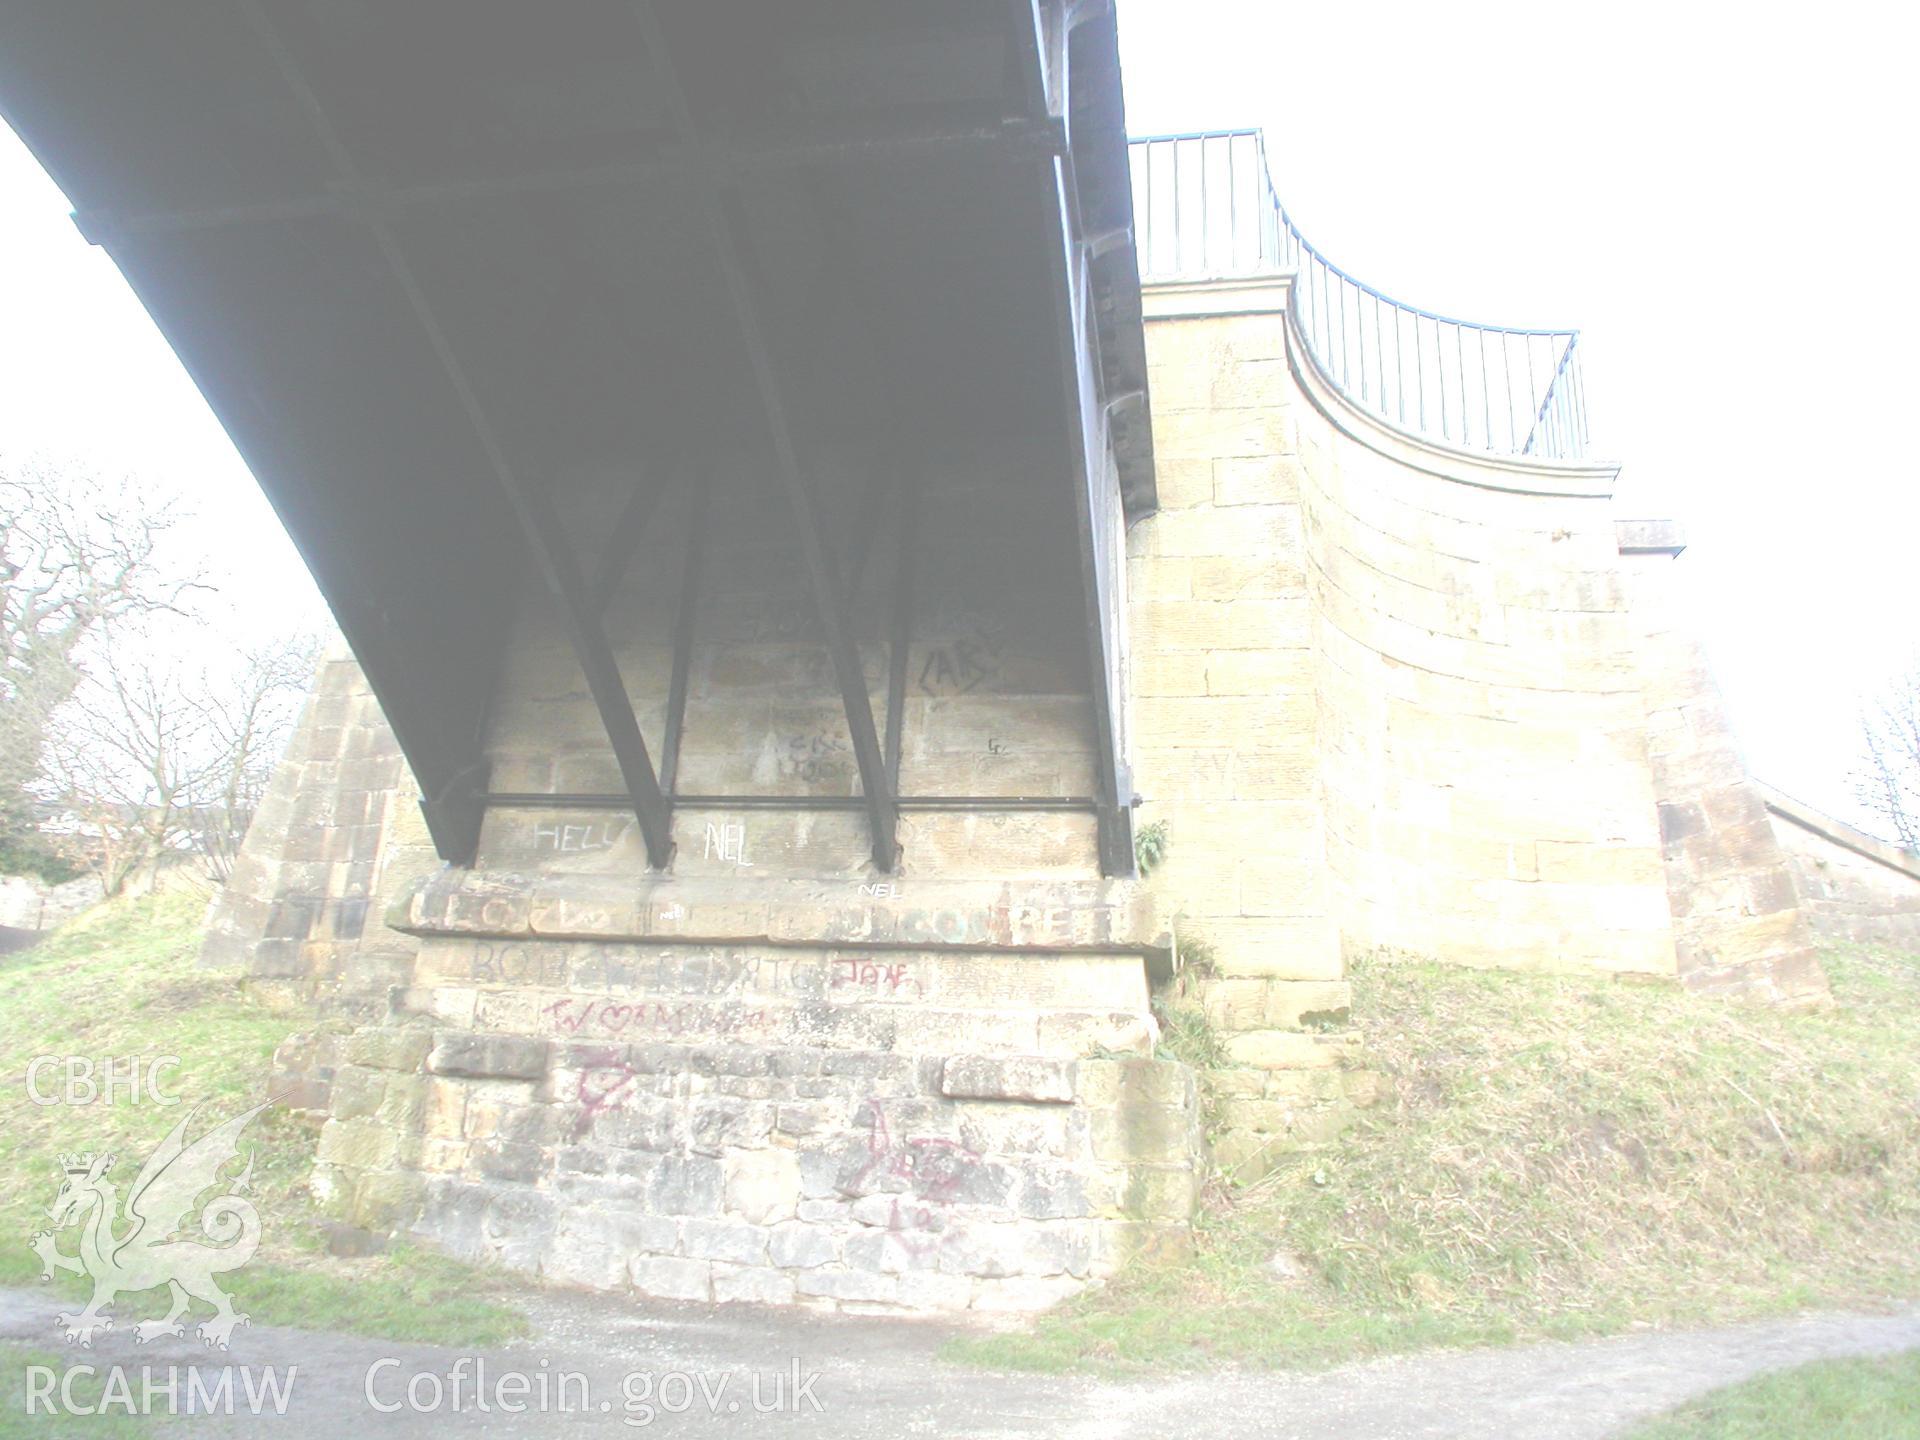 Northern span and abutment of the aqueduct.